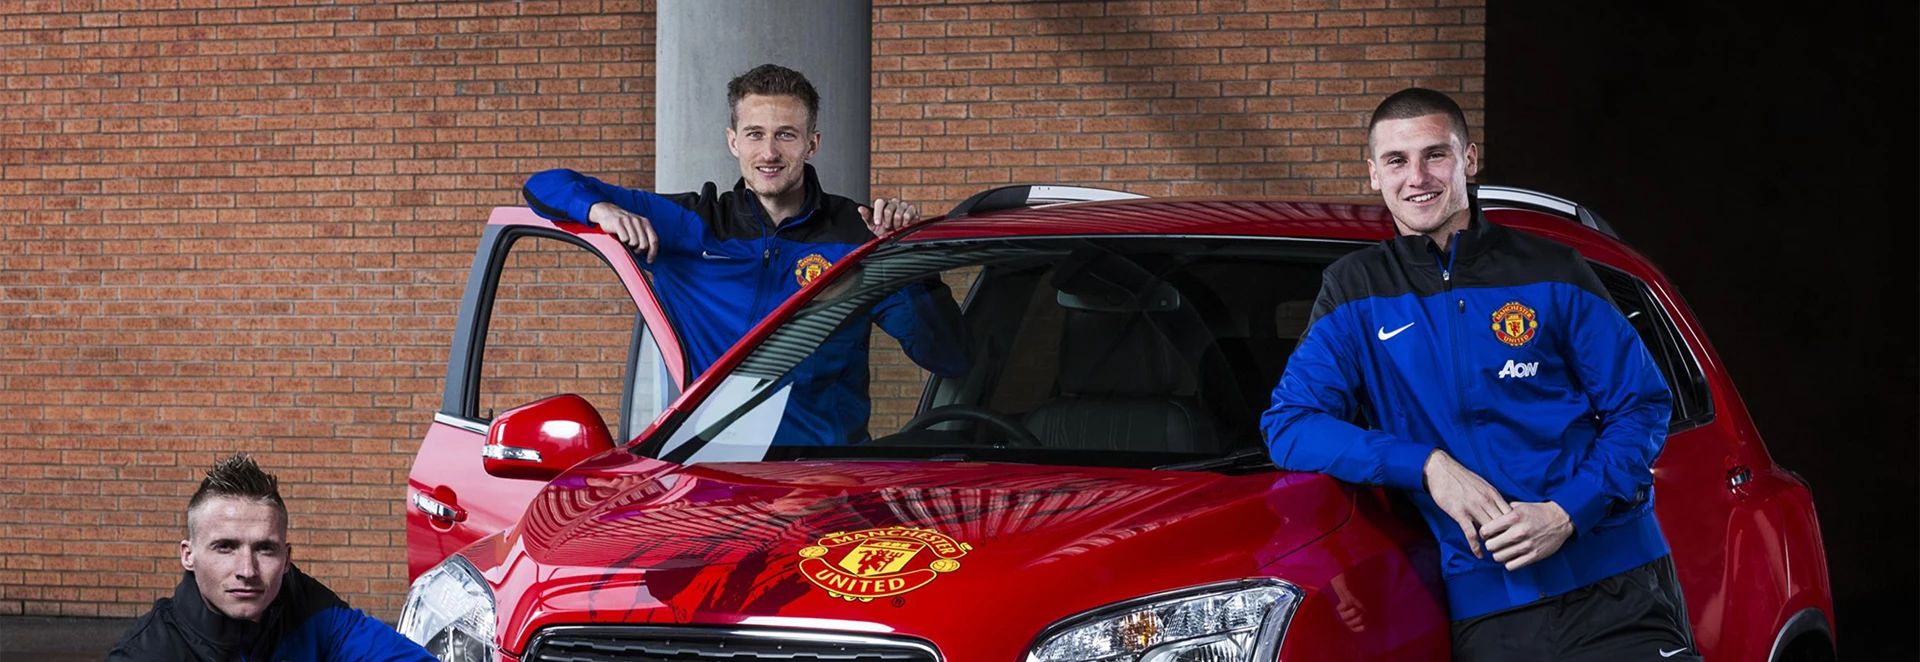 The cars of Manchester United players 